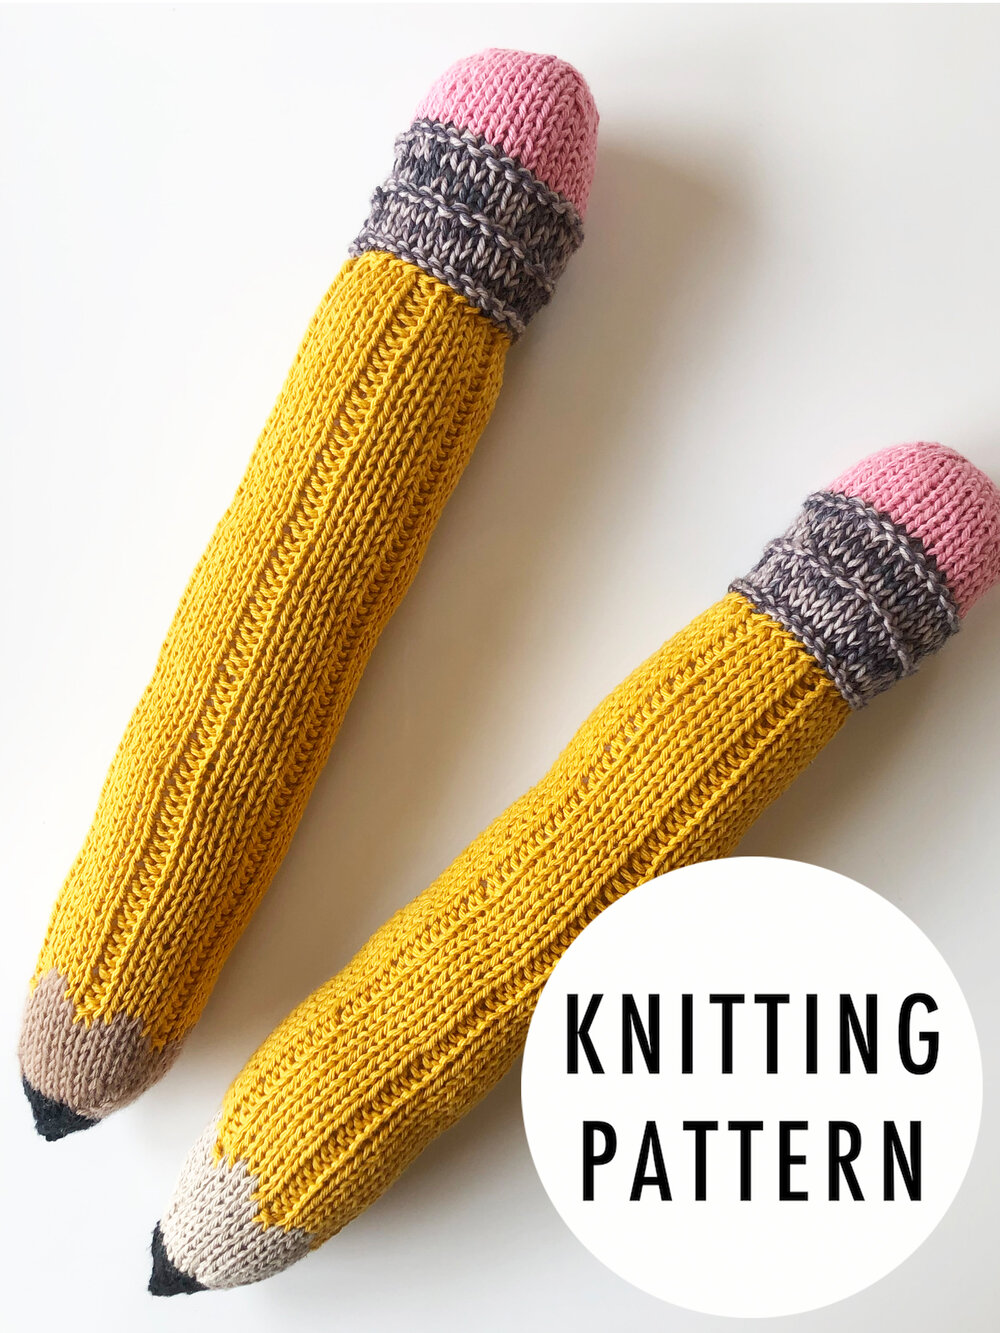 Knitting Pattern: Giant Pencil Toy